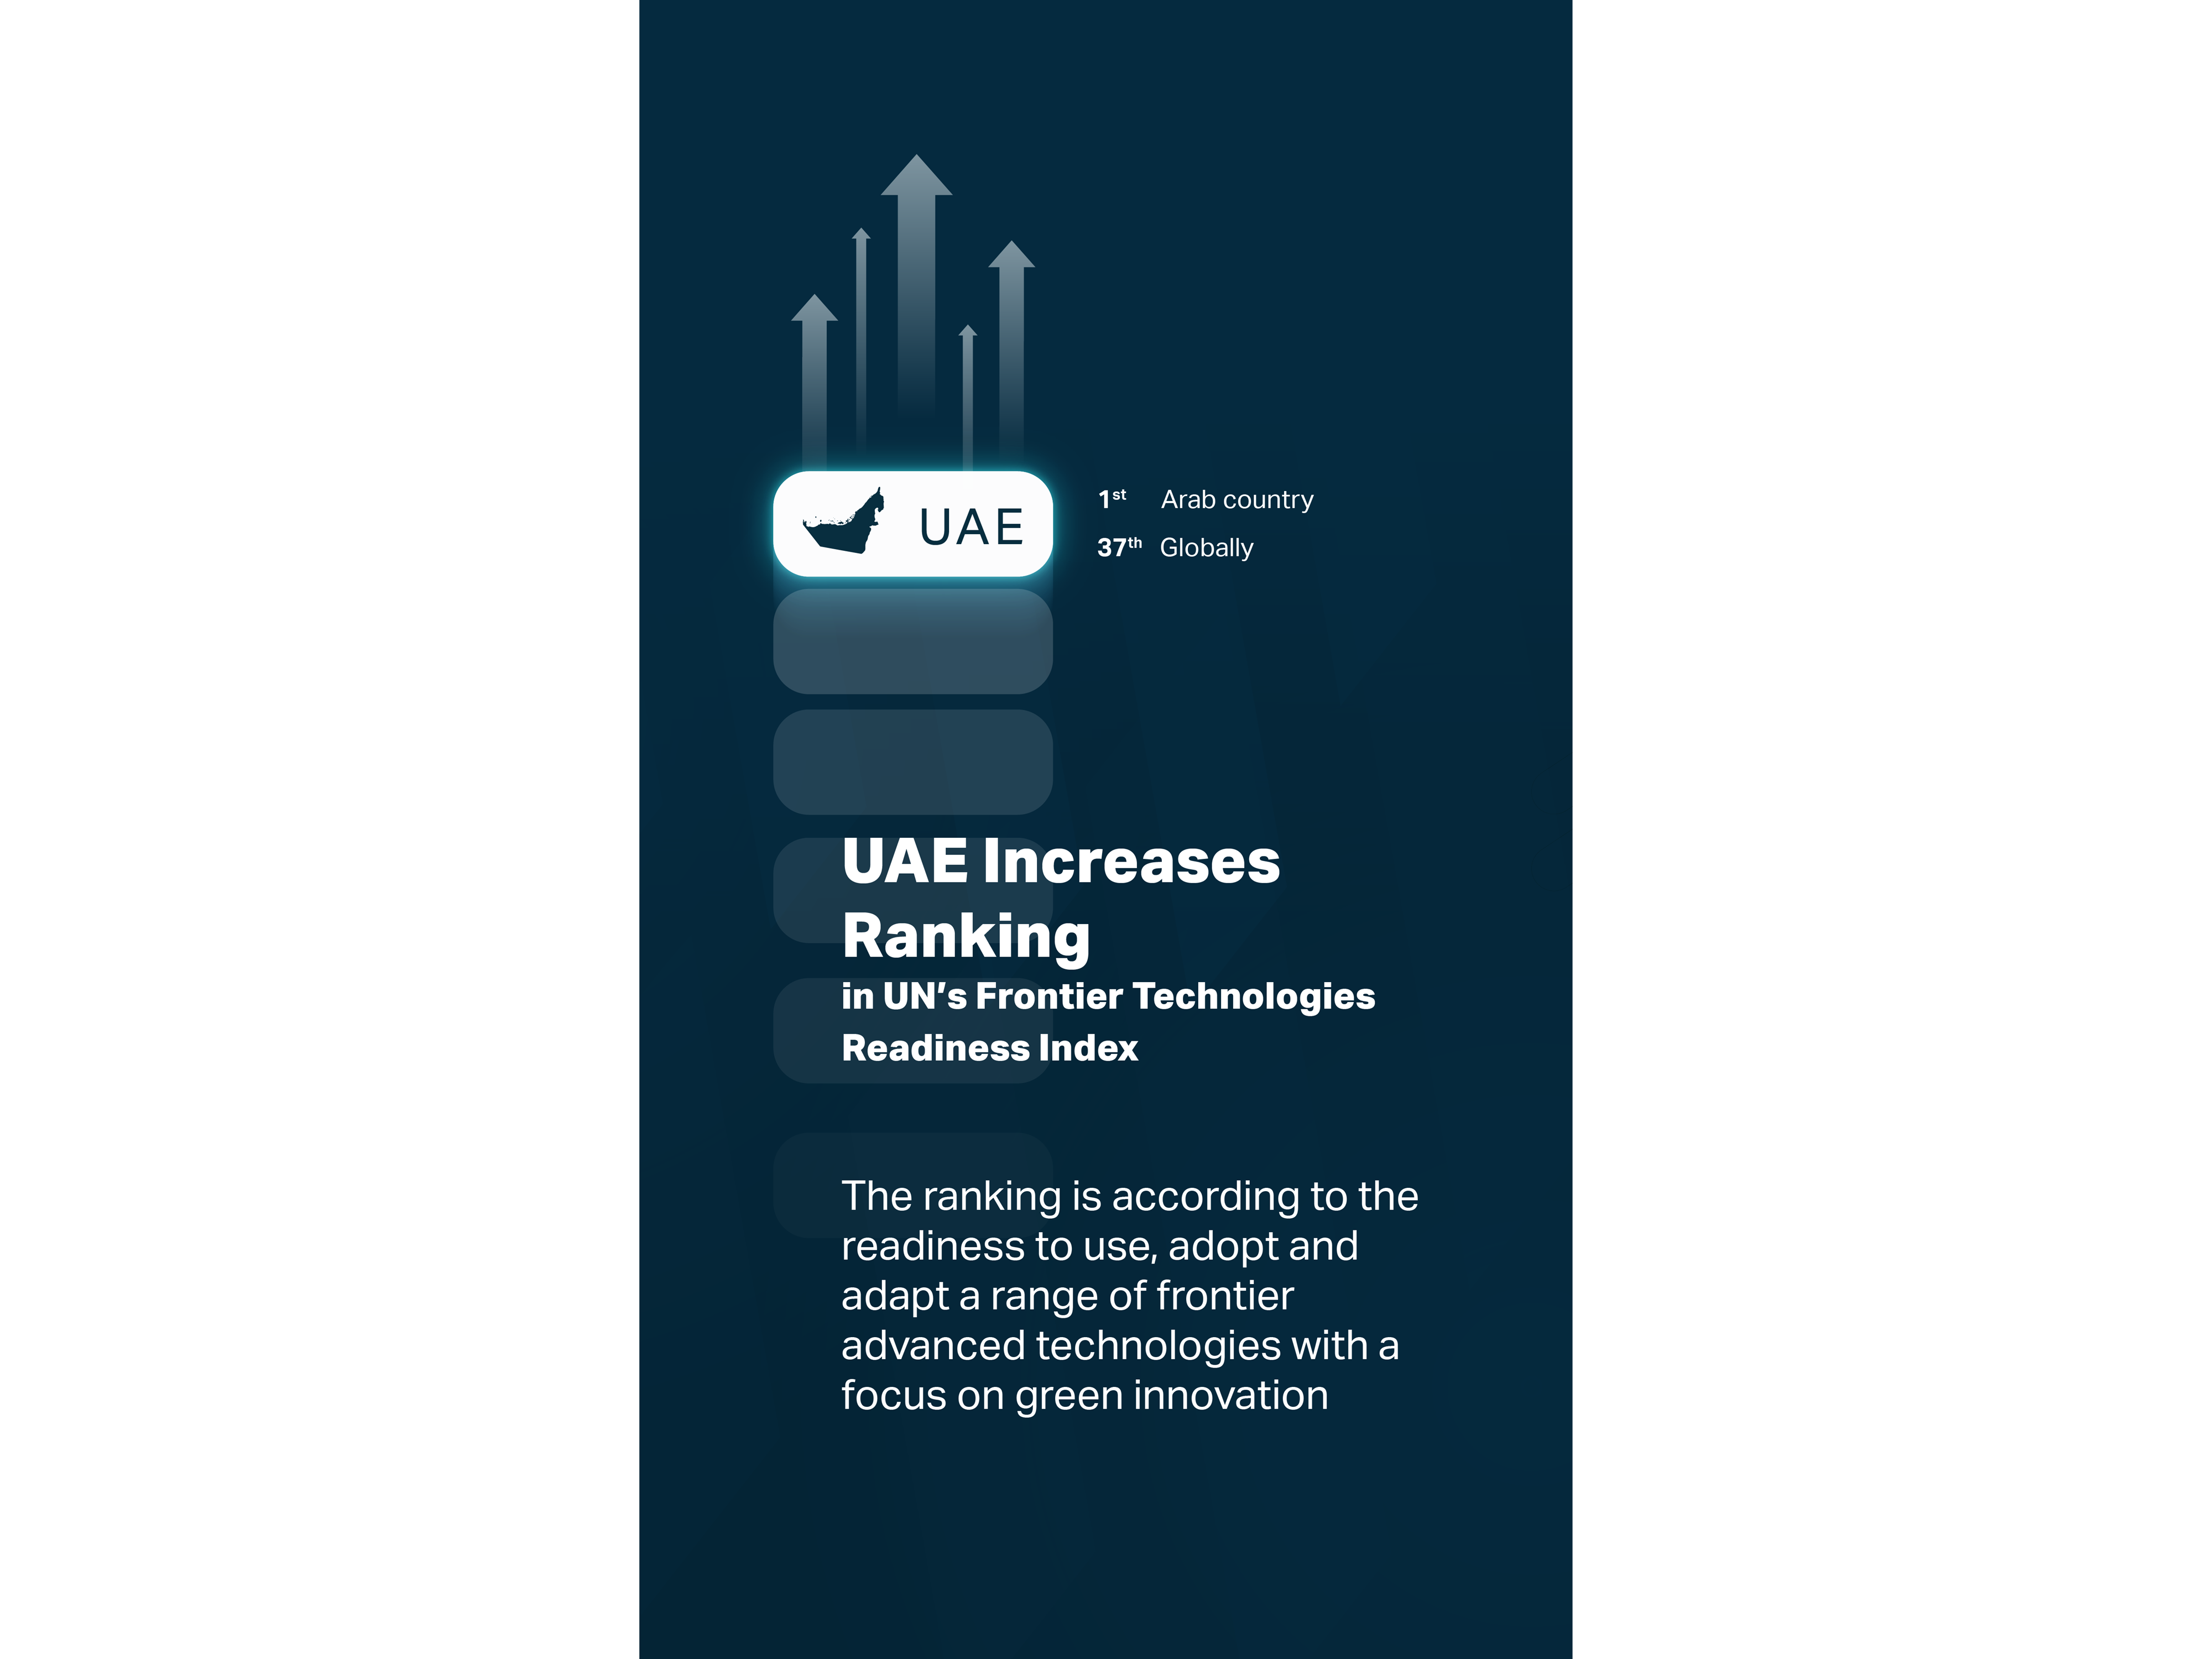 UAE Increases Ranking in UN’s Frontier Technologies Readiness Index